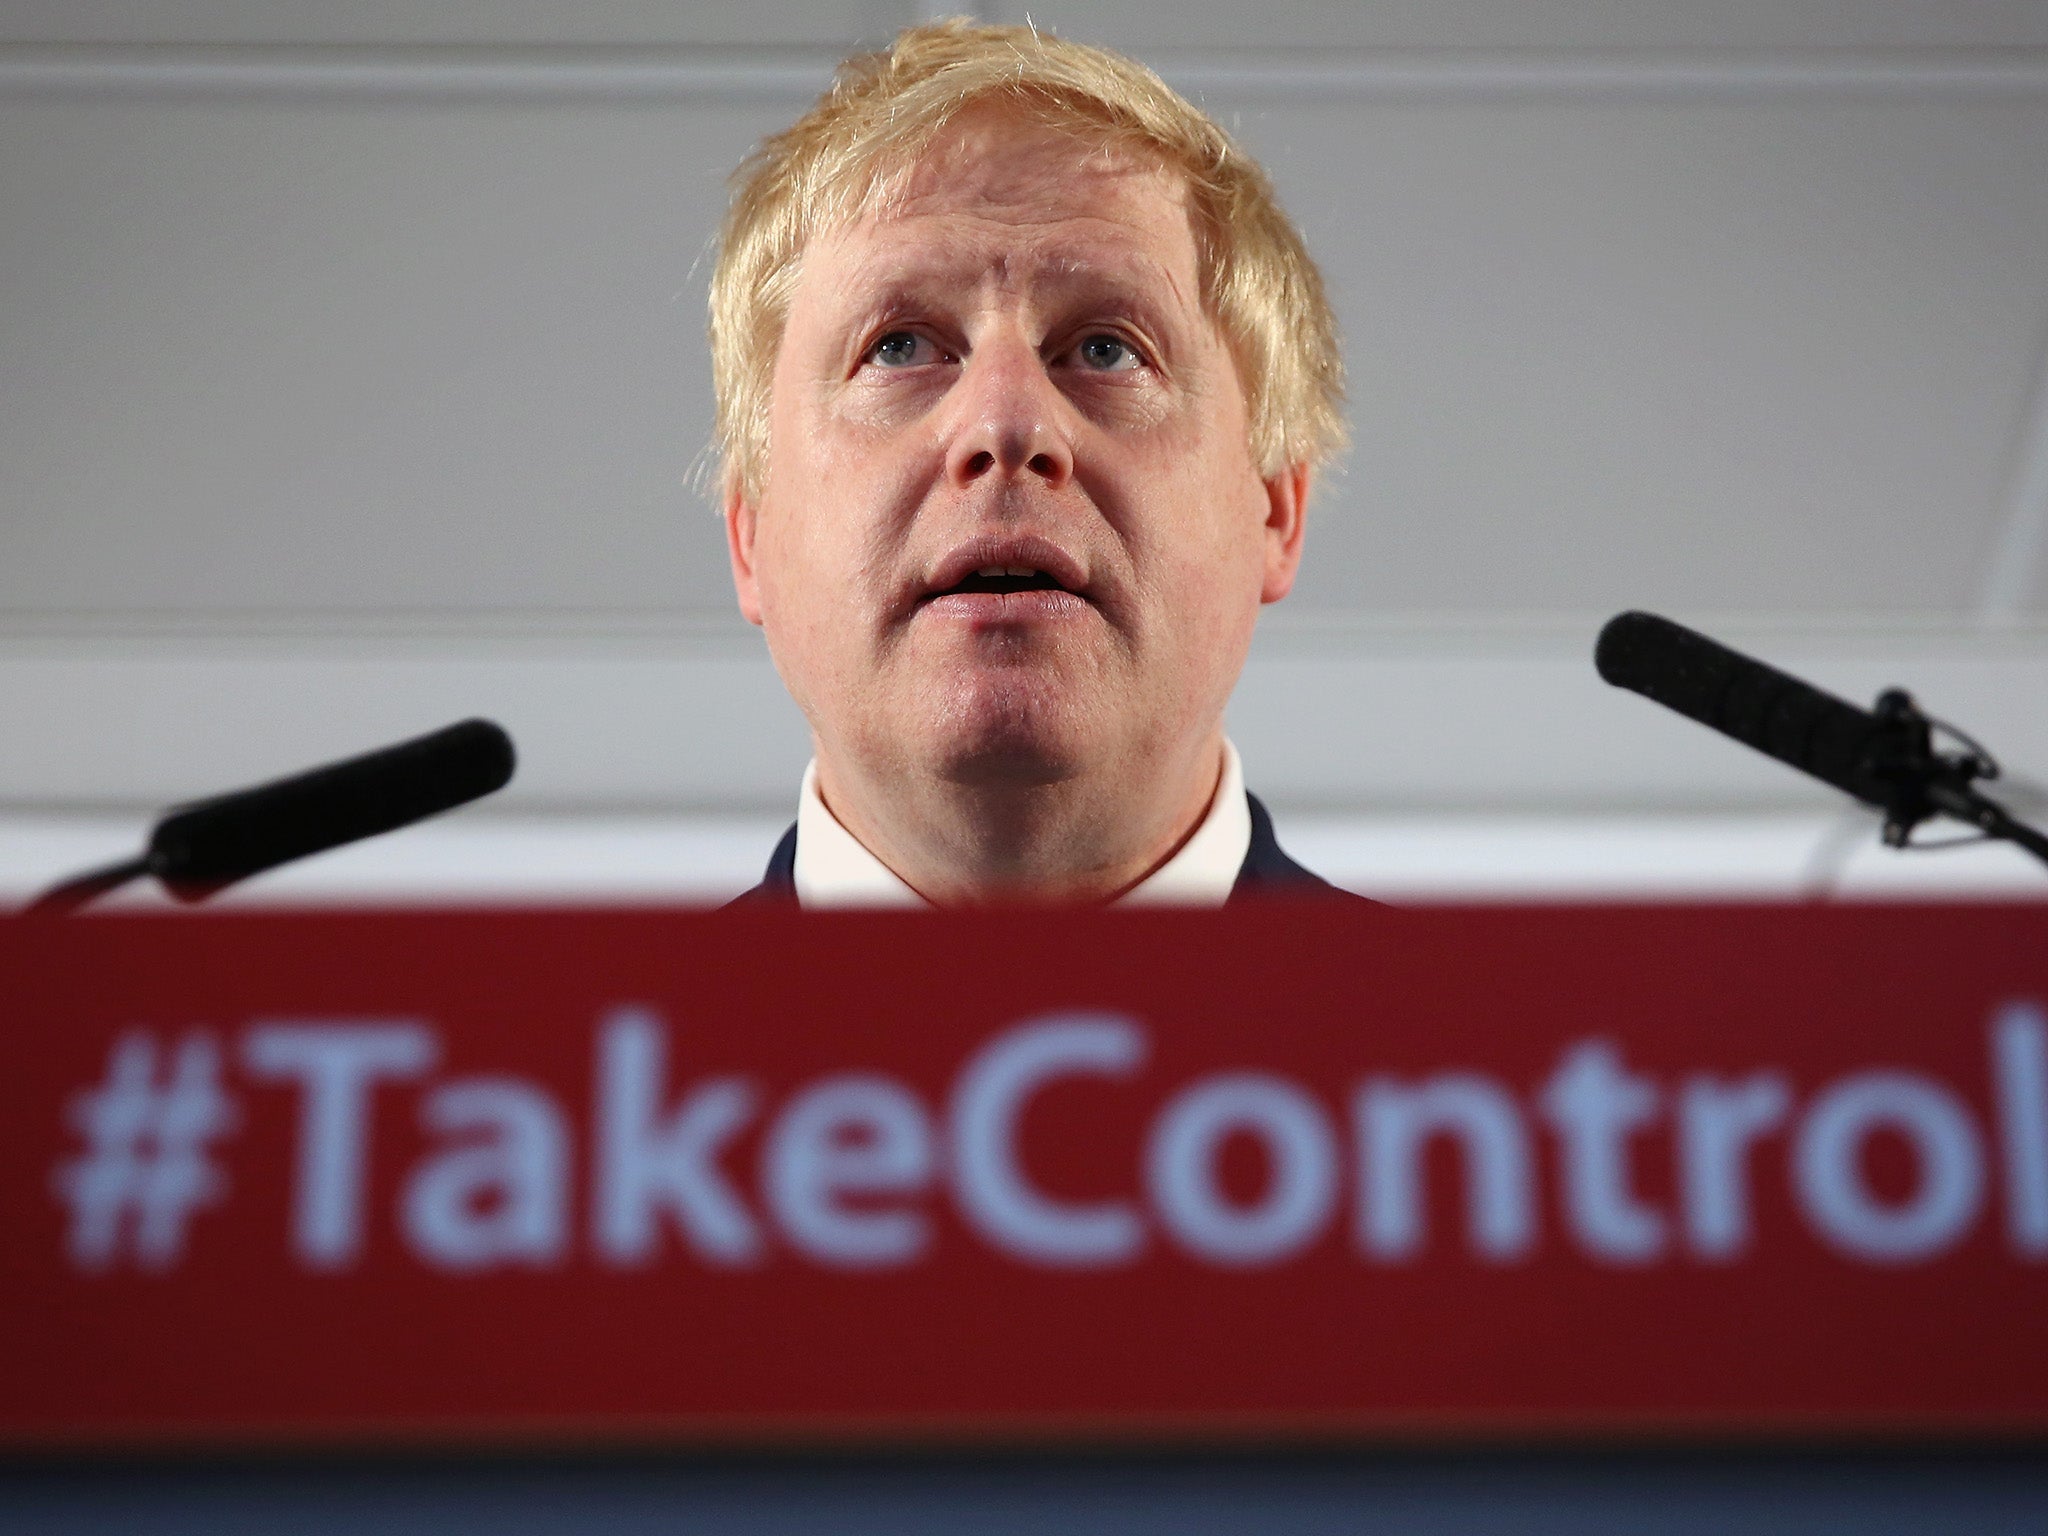 Boris Johnson has been campaigning for Britain to leave the EU